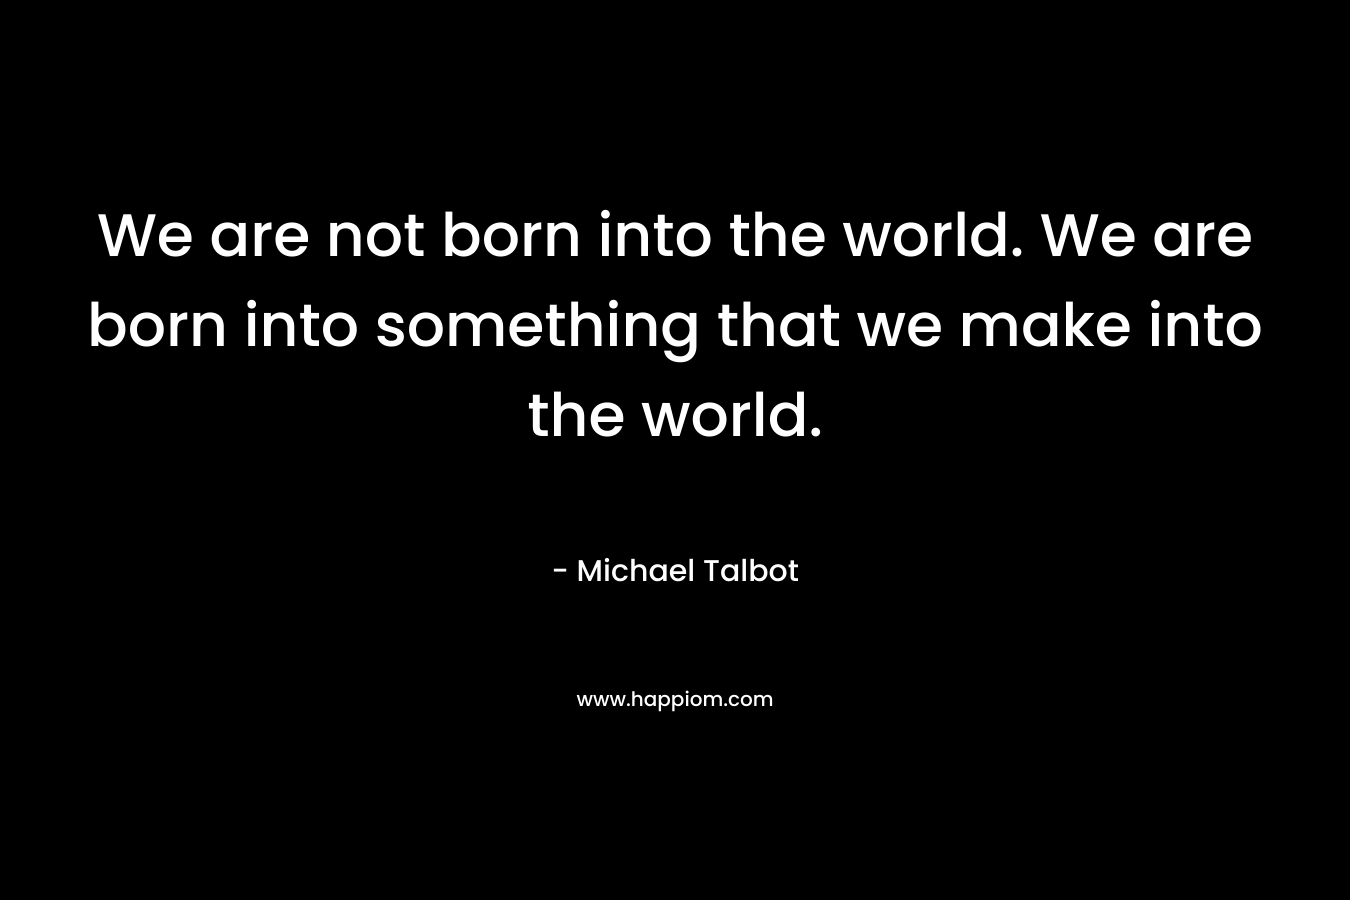 We are not born into the world. We are born into something that we make into the world.